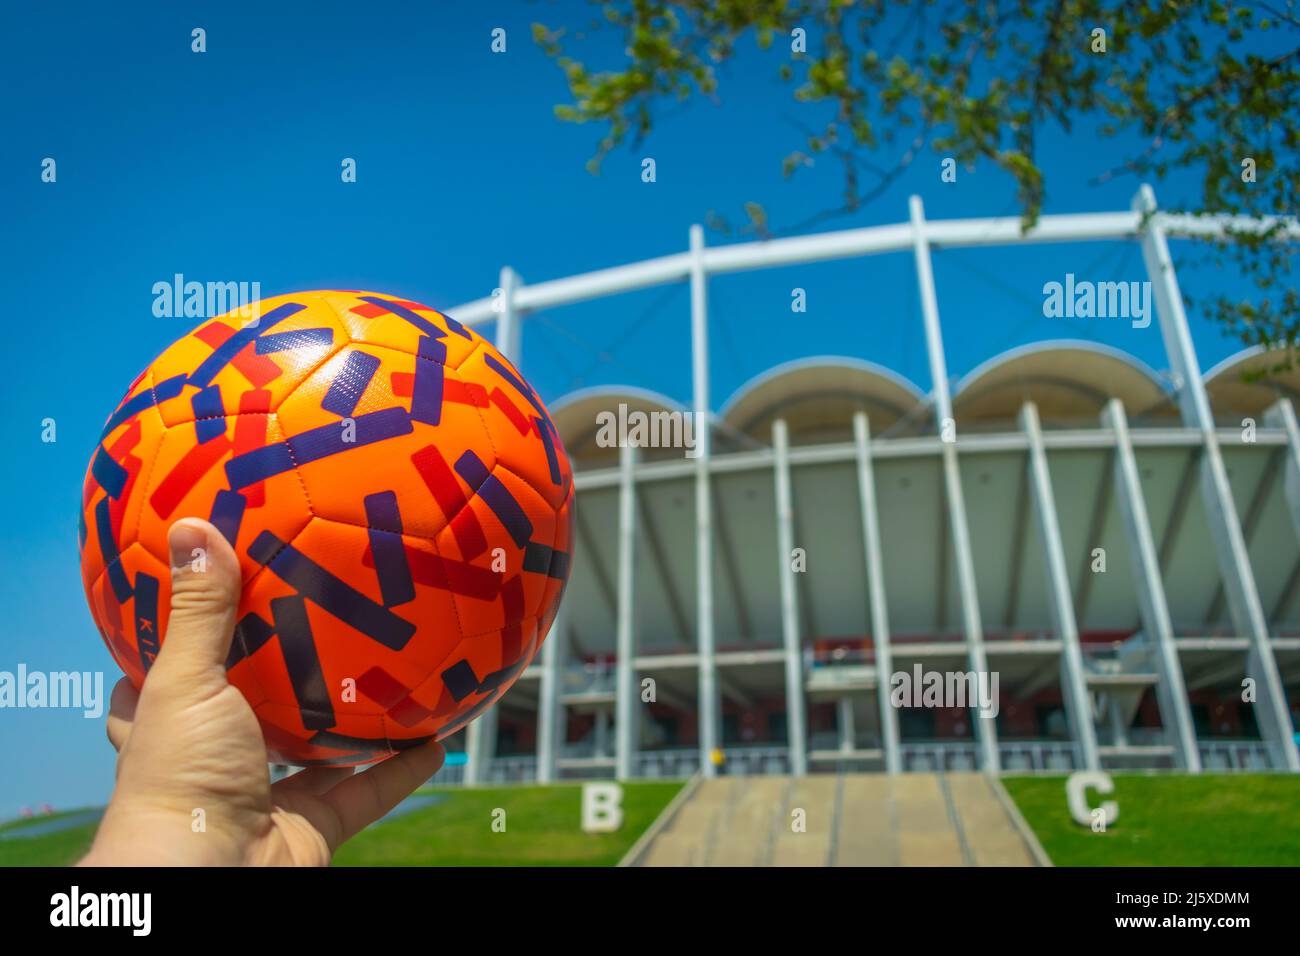 Hand holding Colorful Football with football stadium background Qatar World Cup 2022 Concept close-up Stock Photo